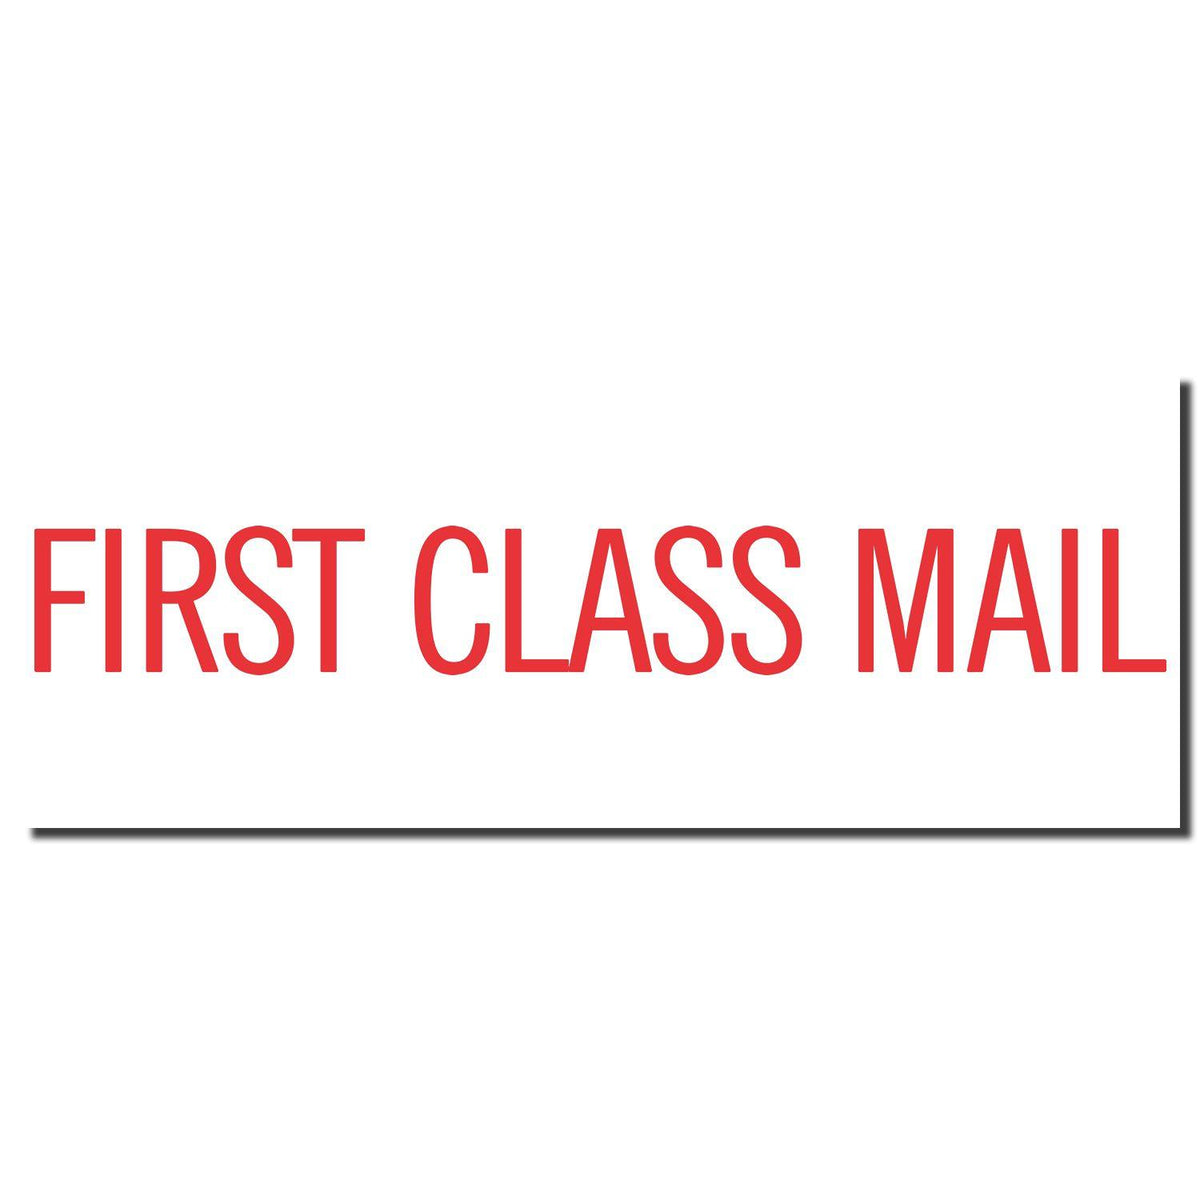 Enlarged Imprint for Large Red First Class Mail Xstamper Stamp